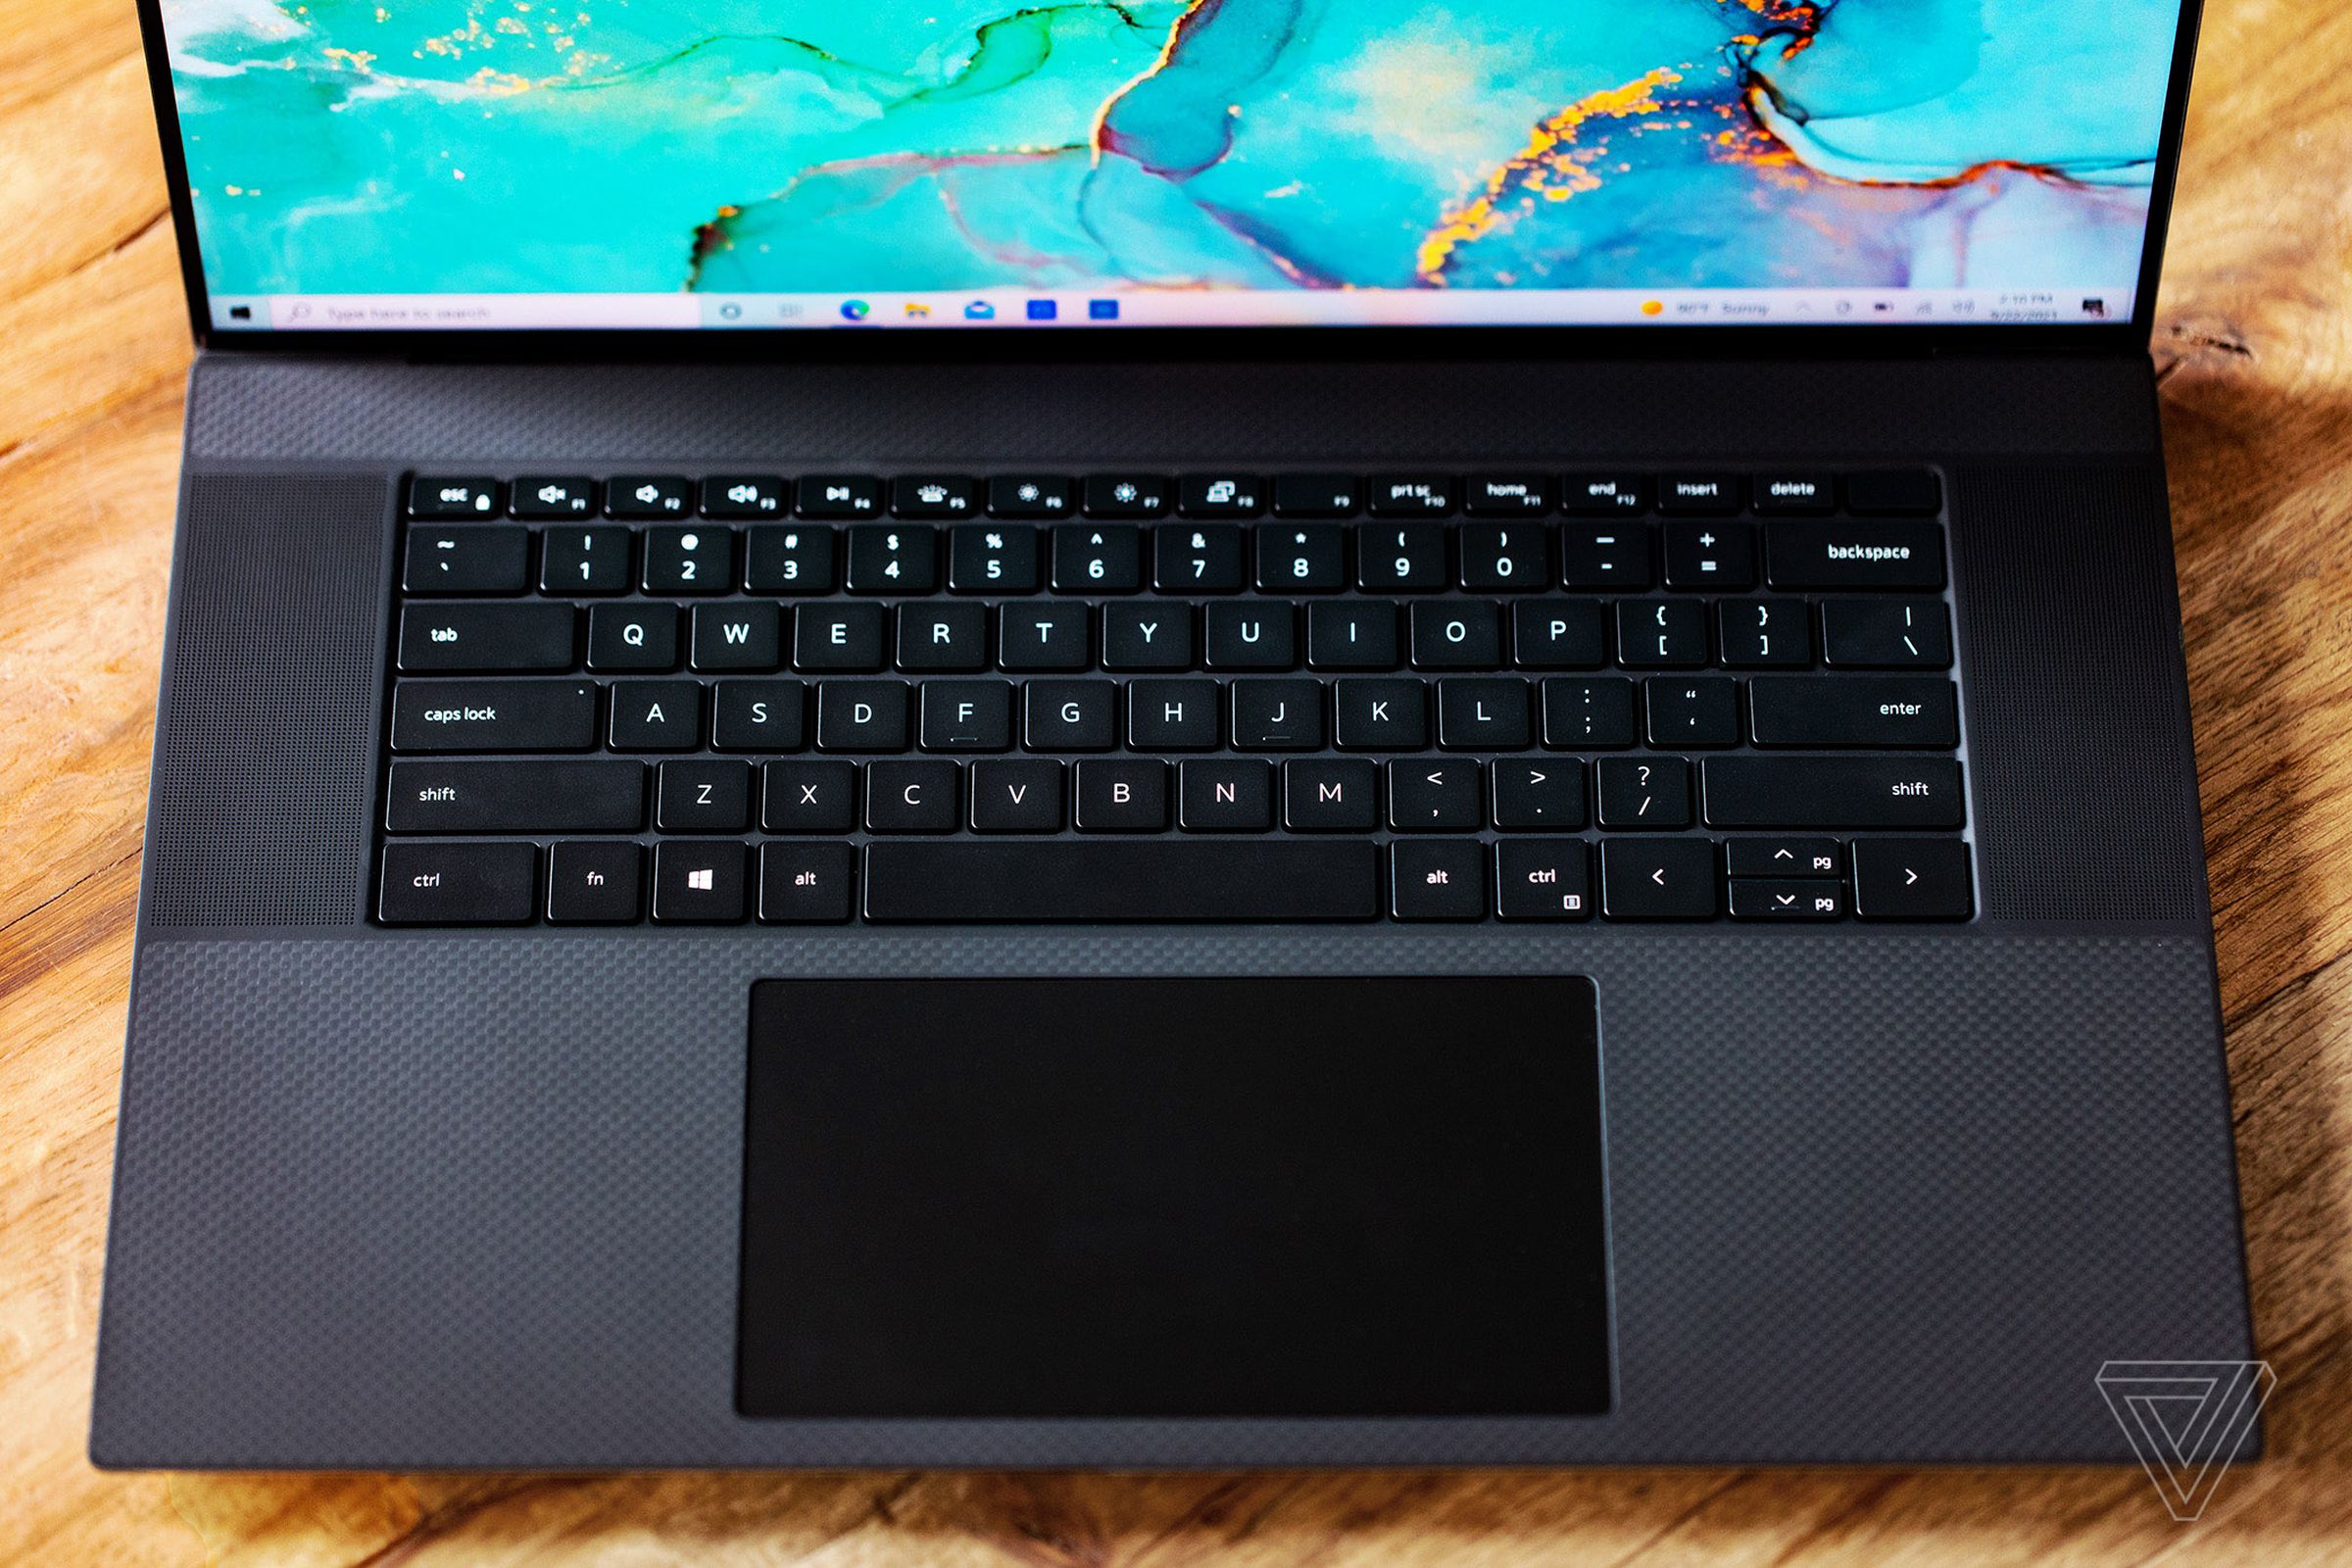 The XPS 17’s keyboard and trackpad are roomy and comfortable, but some may miss a number pad.